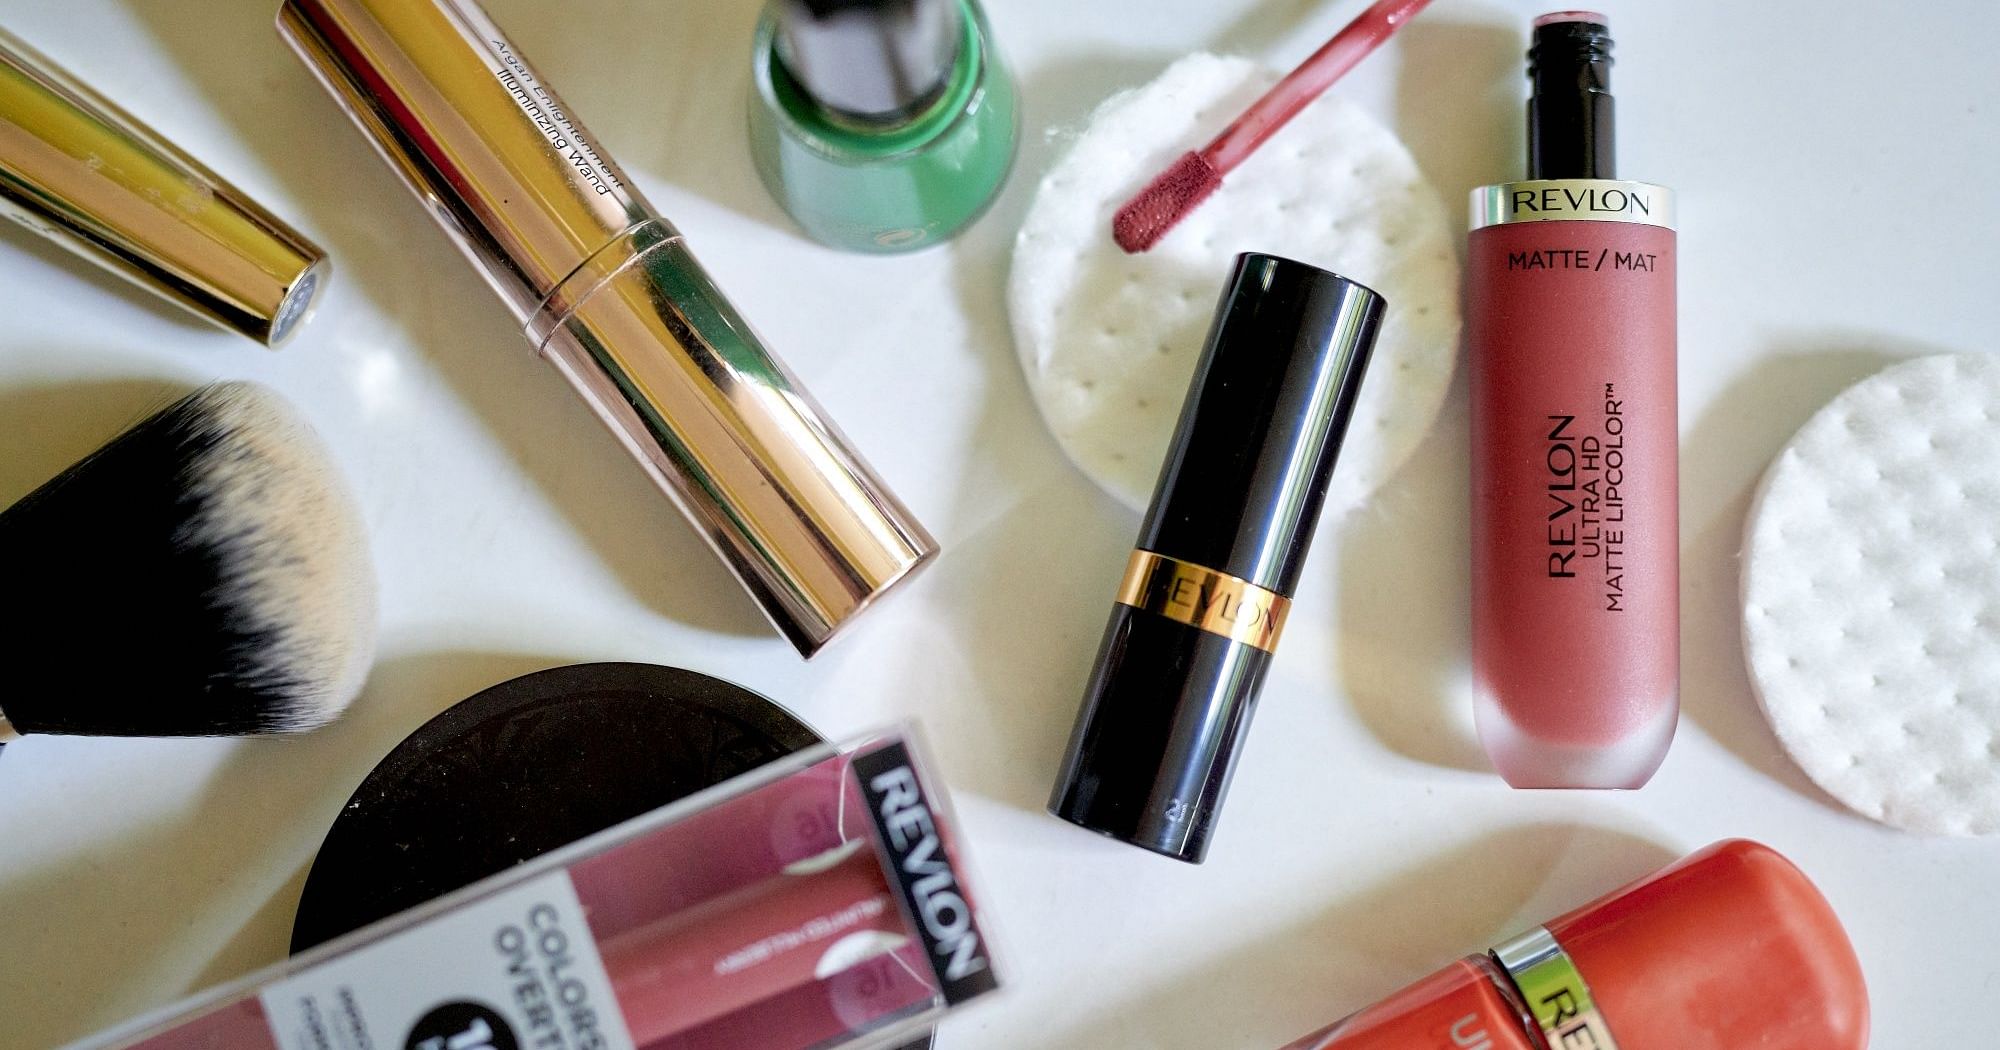 Revlon Shareholders Can’t Form Own Bankruptcy Committee, Judge Rules